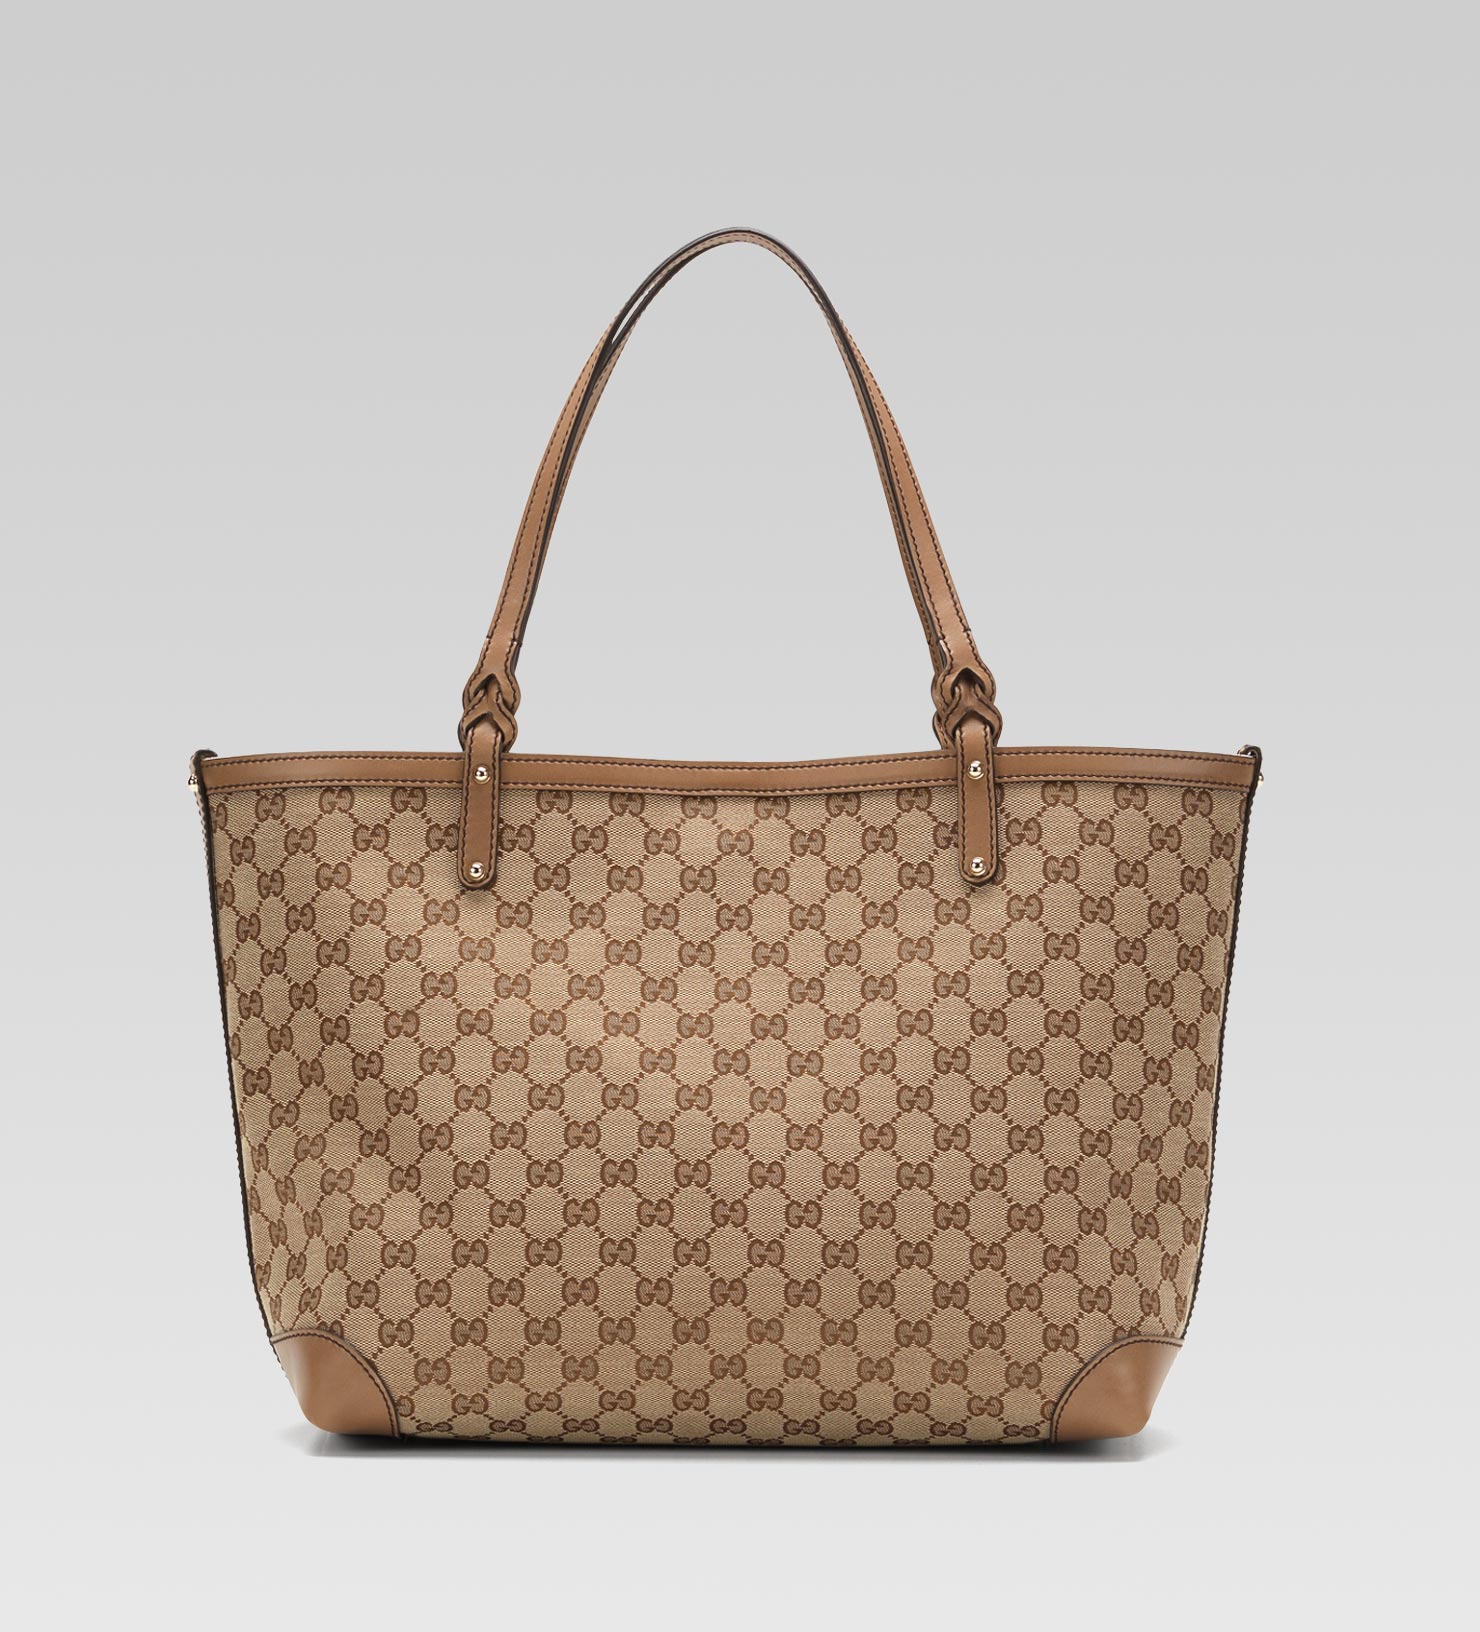 Authentic Gucci Brown GG Fabric Canvas Tote Bag